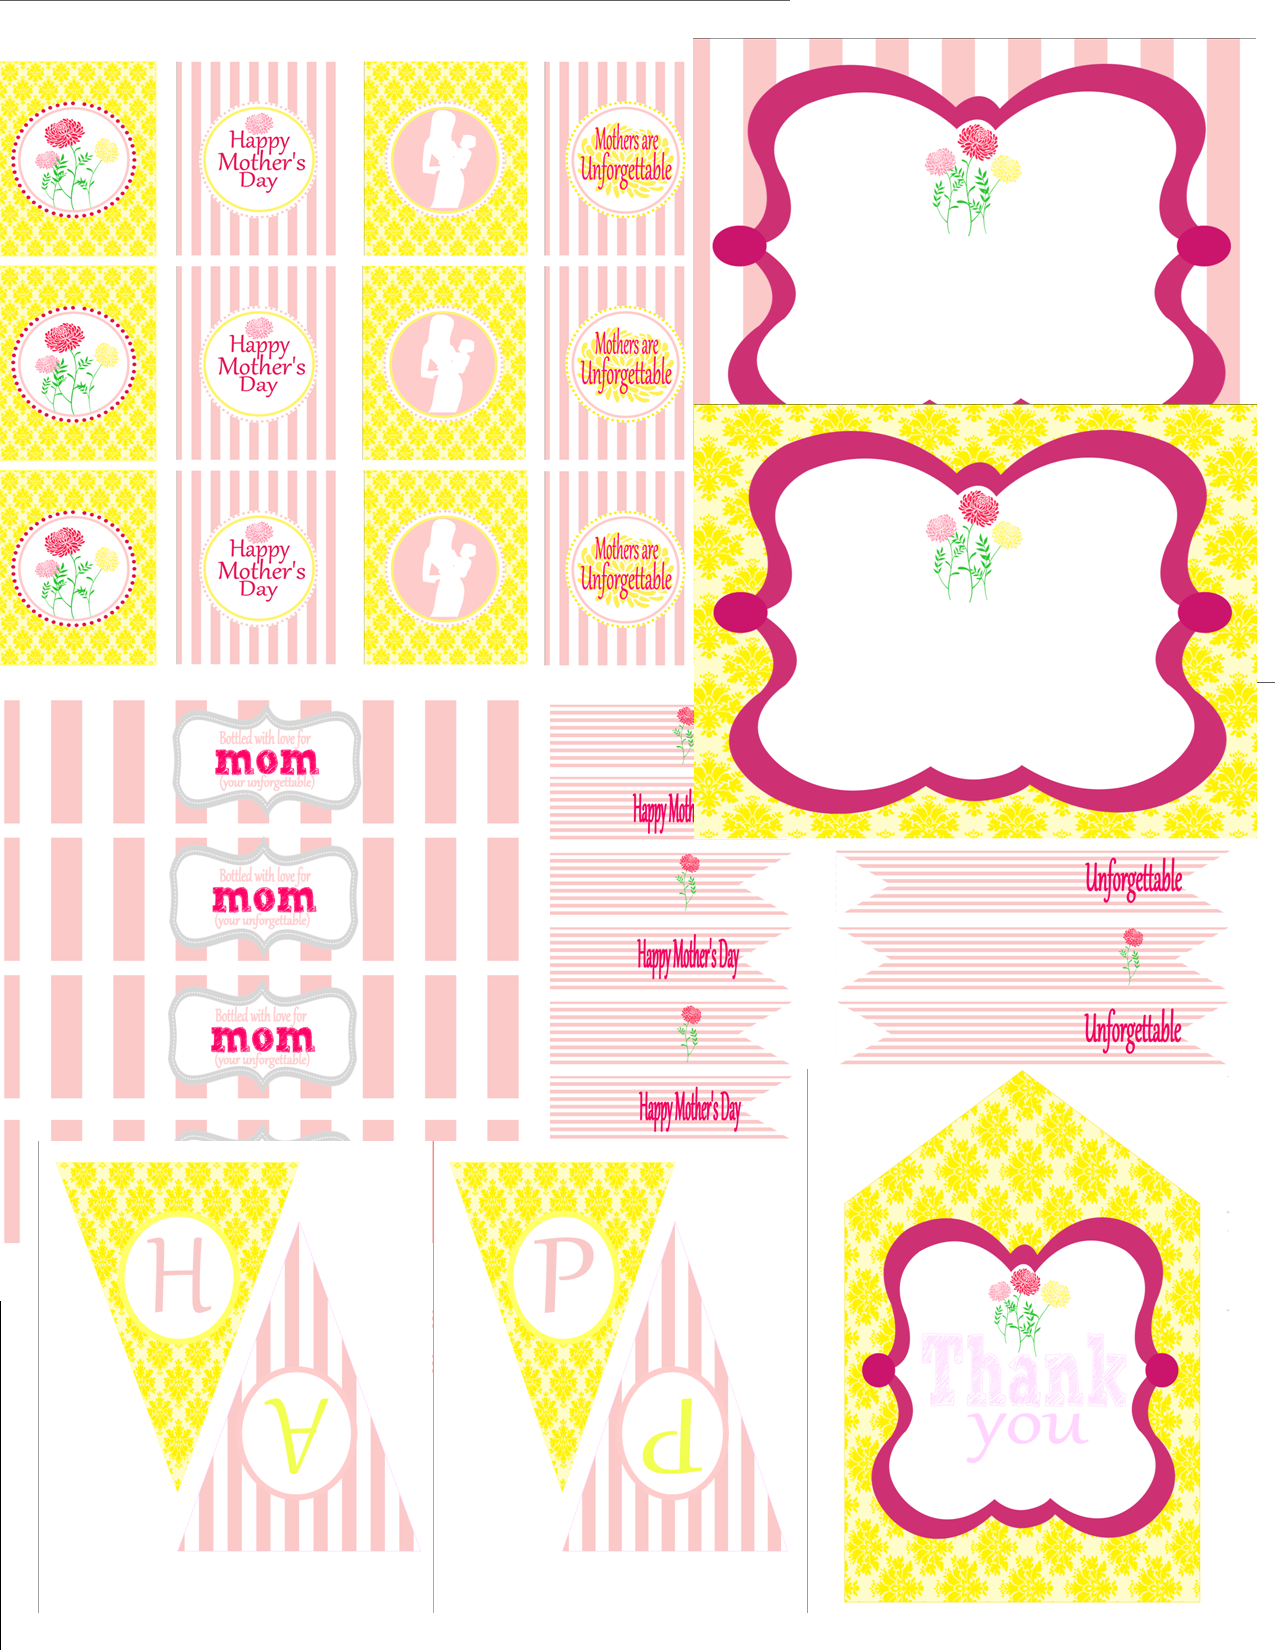 FREE Mother s Day Party Printables From 9 To 5 Mom Catch My Party